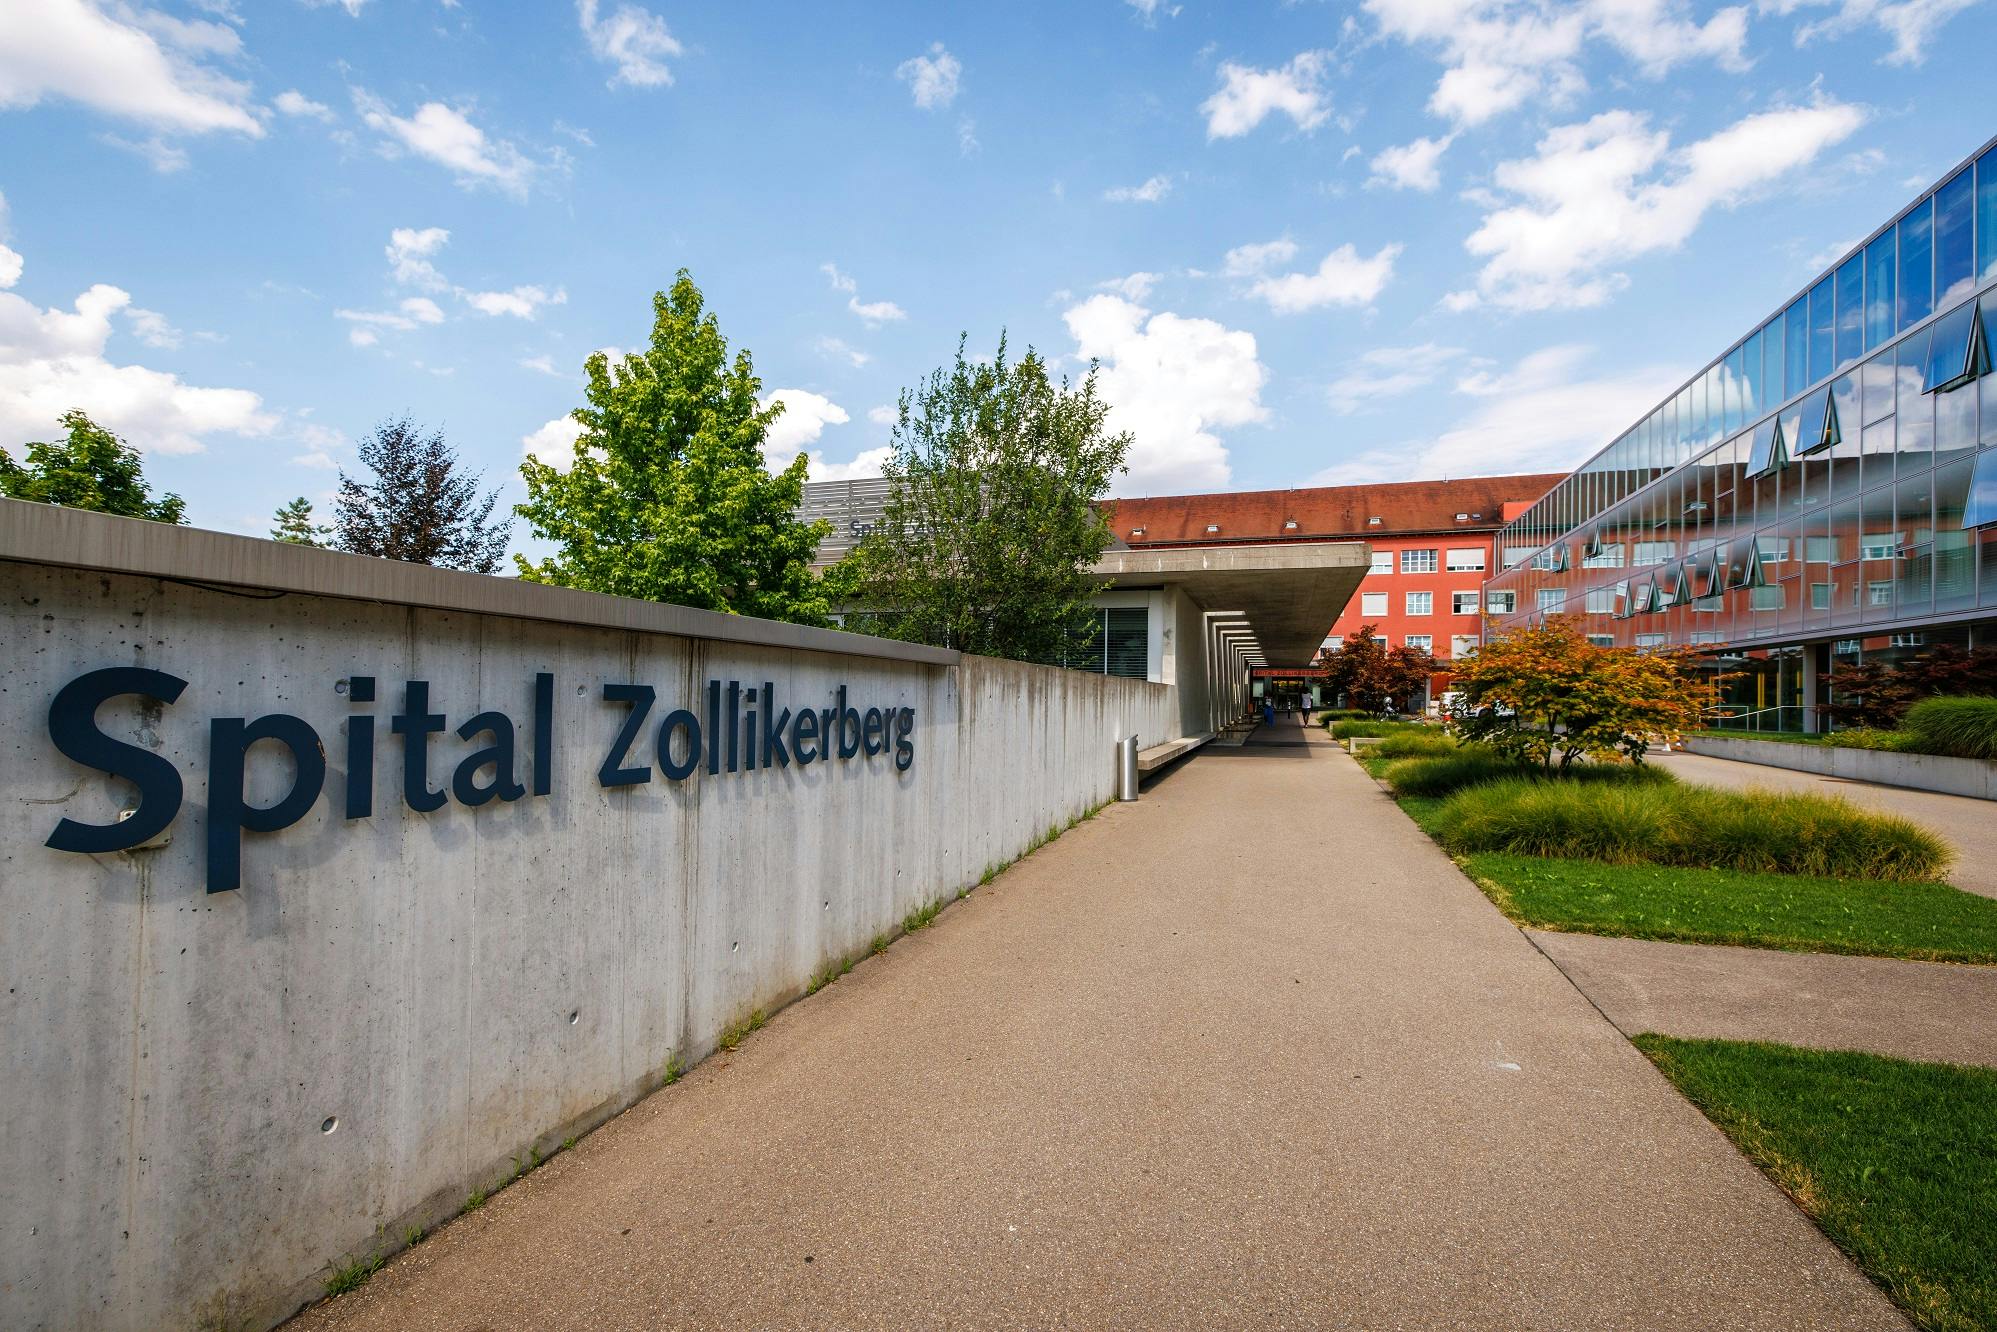 Exterior view of Zollikerberg Hospital with path and green surroundings in sunny weather.